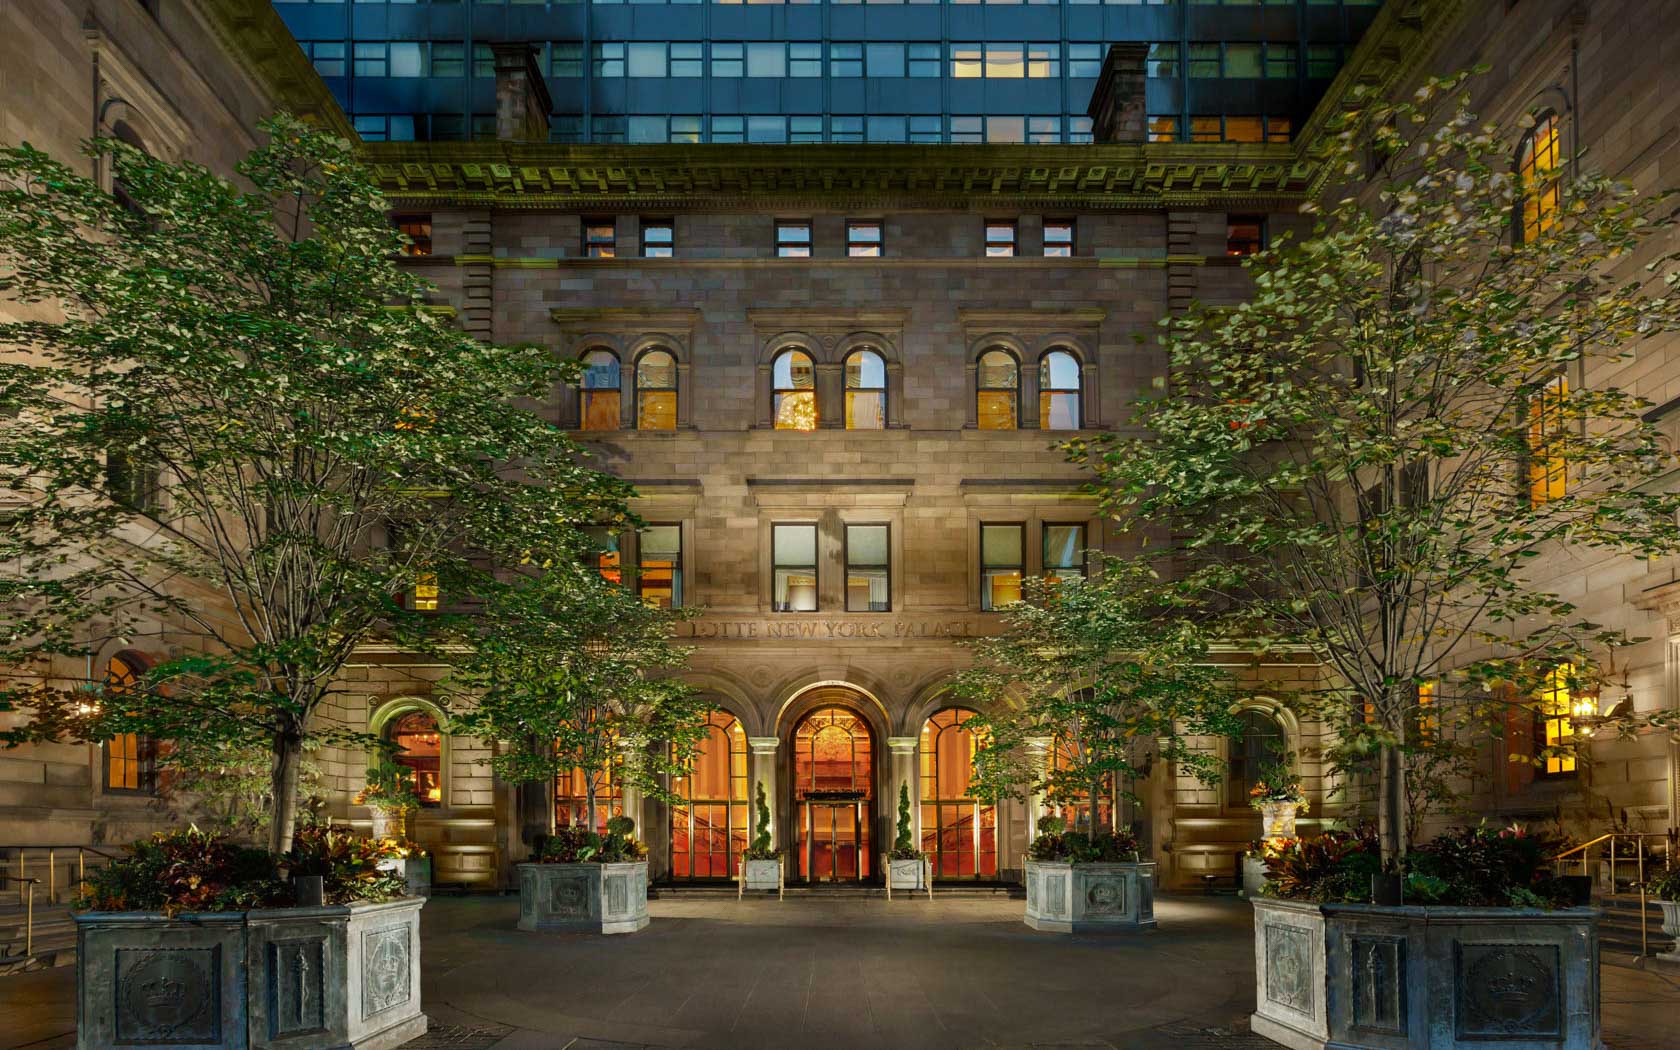 Hotels in Manhattan NY - Media Gallery | Lotte New York Palace